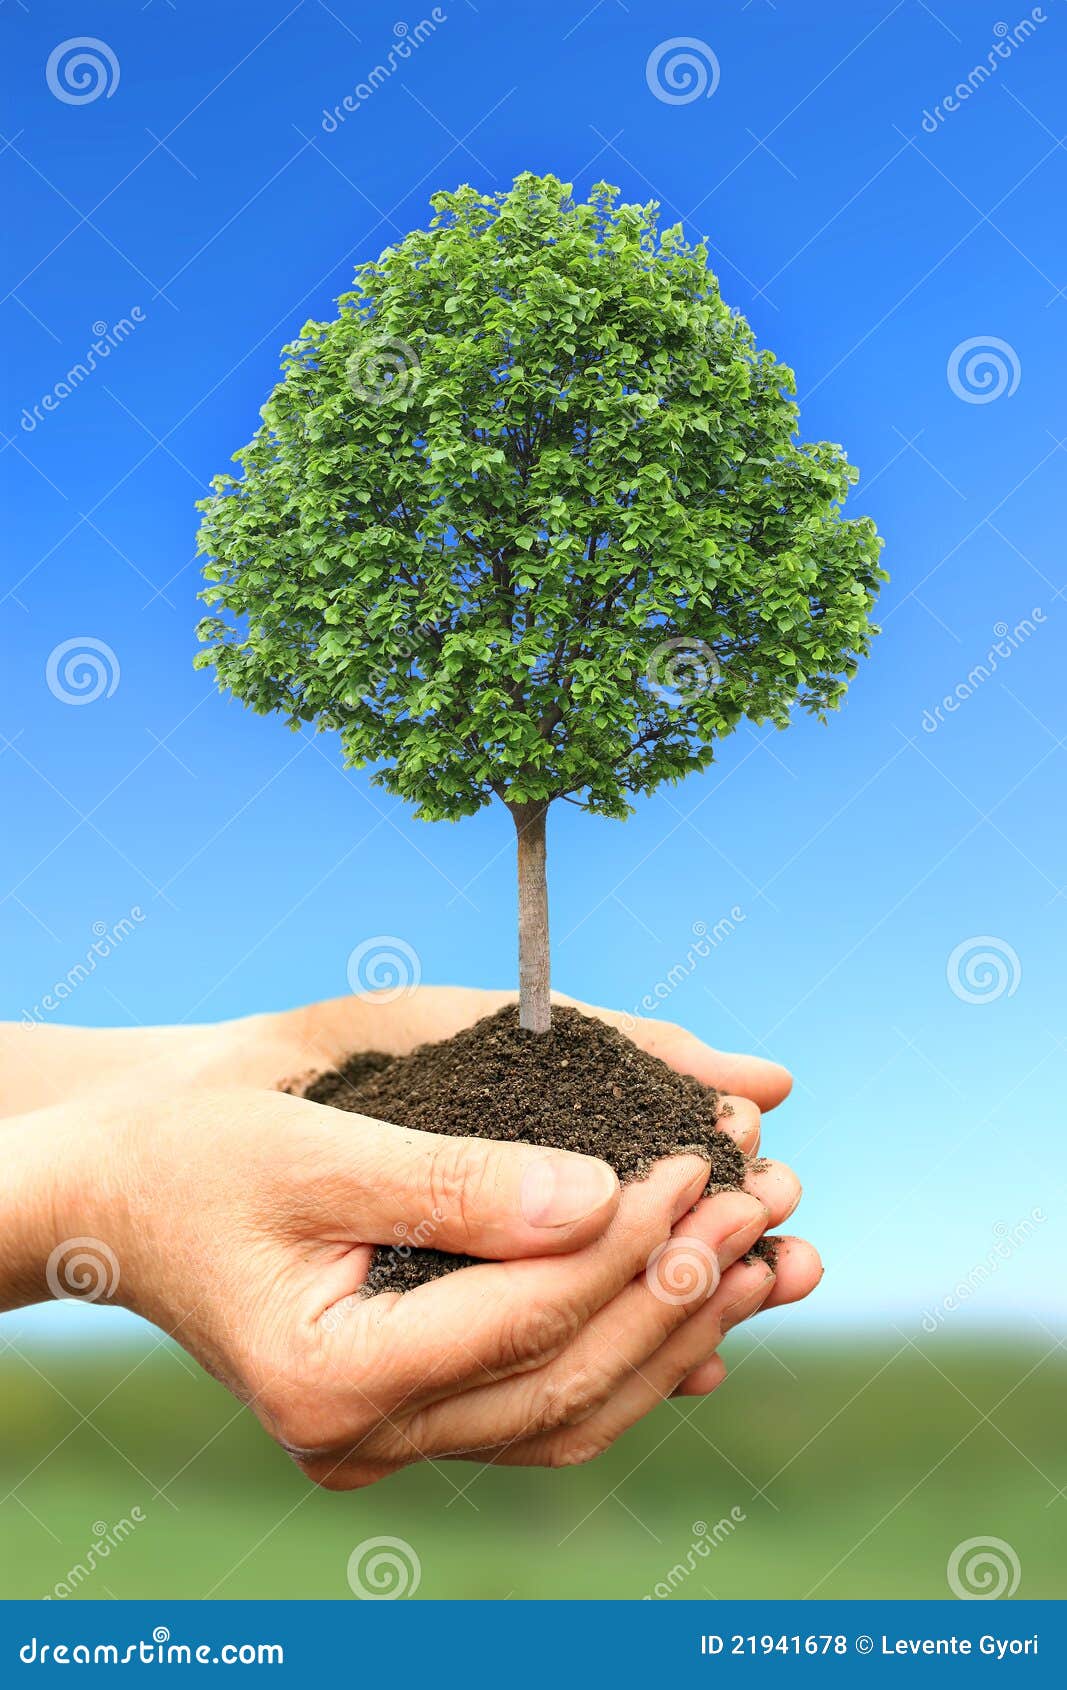 Hand Holding Green Tree in Stock Photo - Image leaf: 21941678